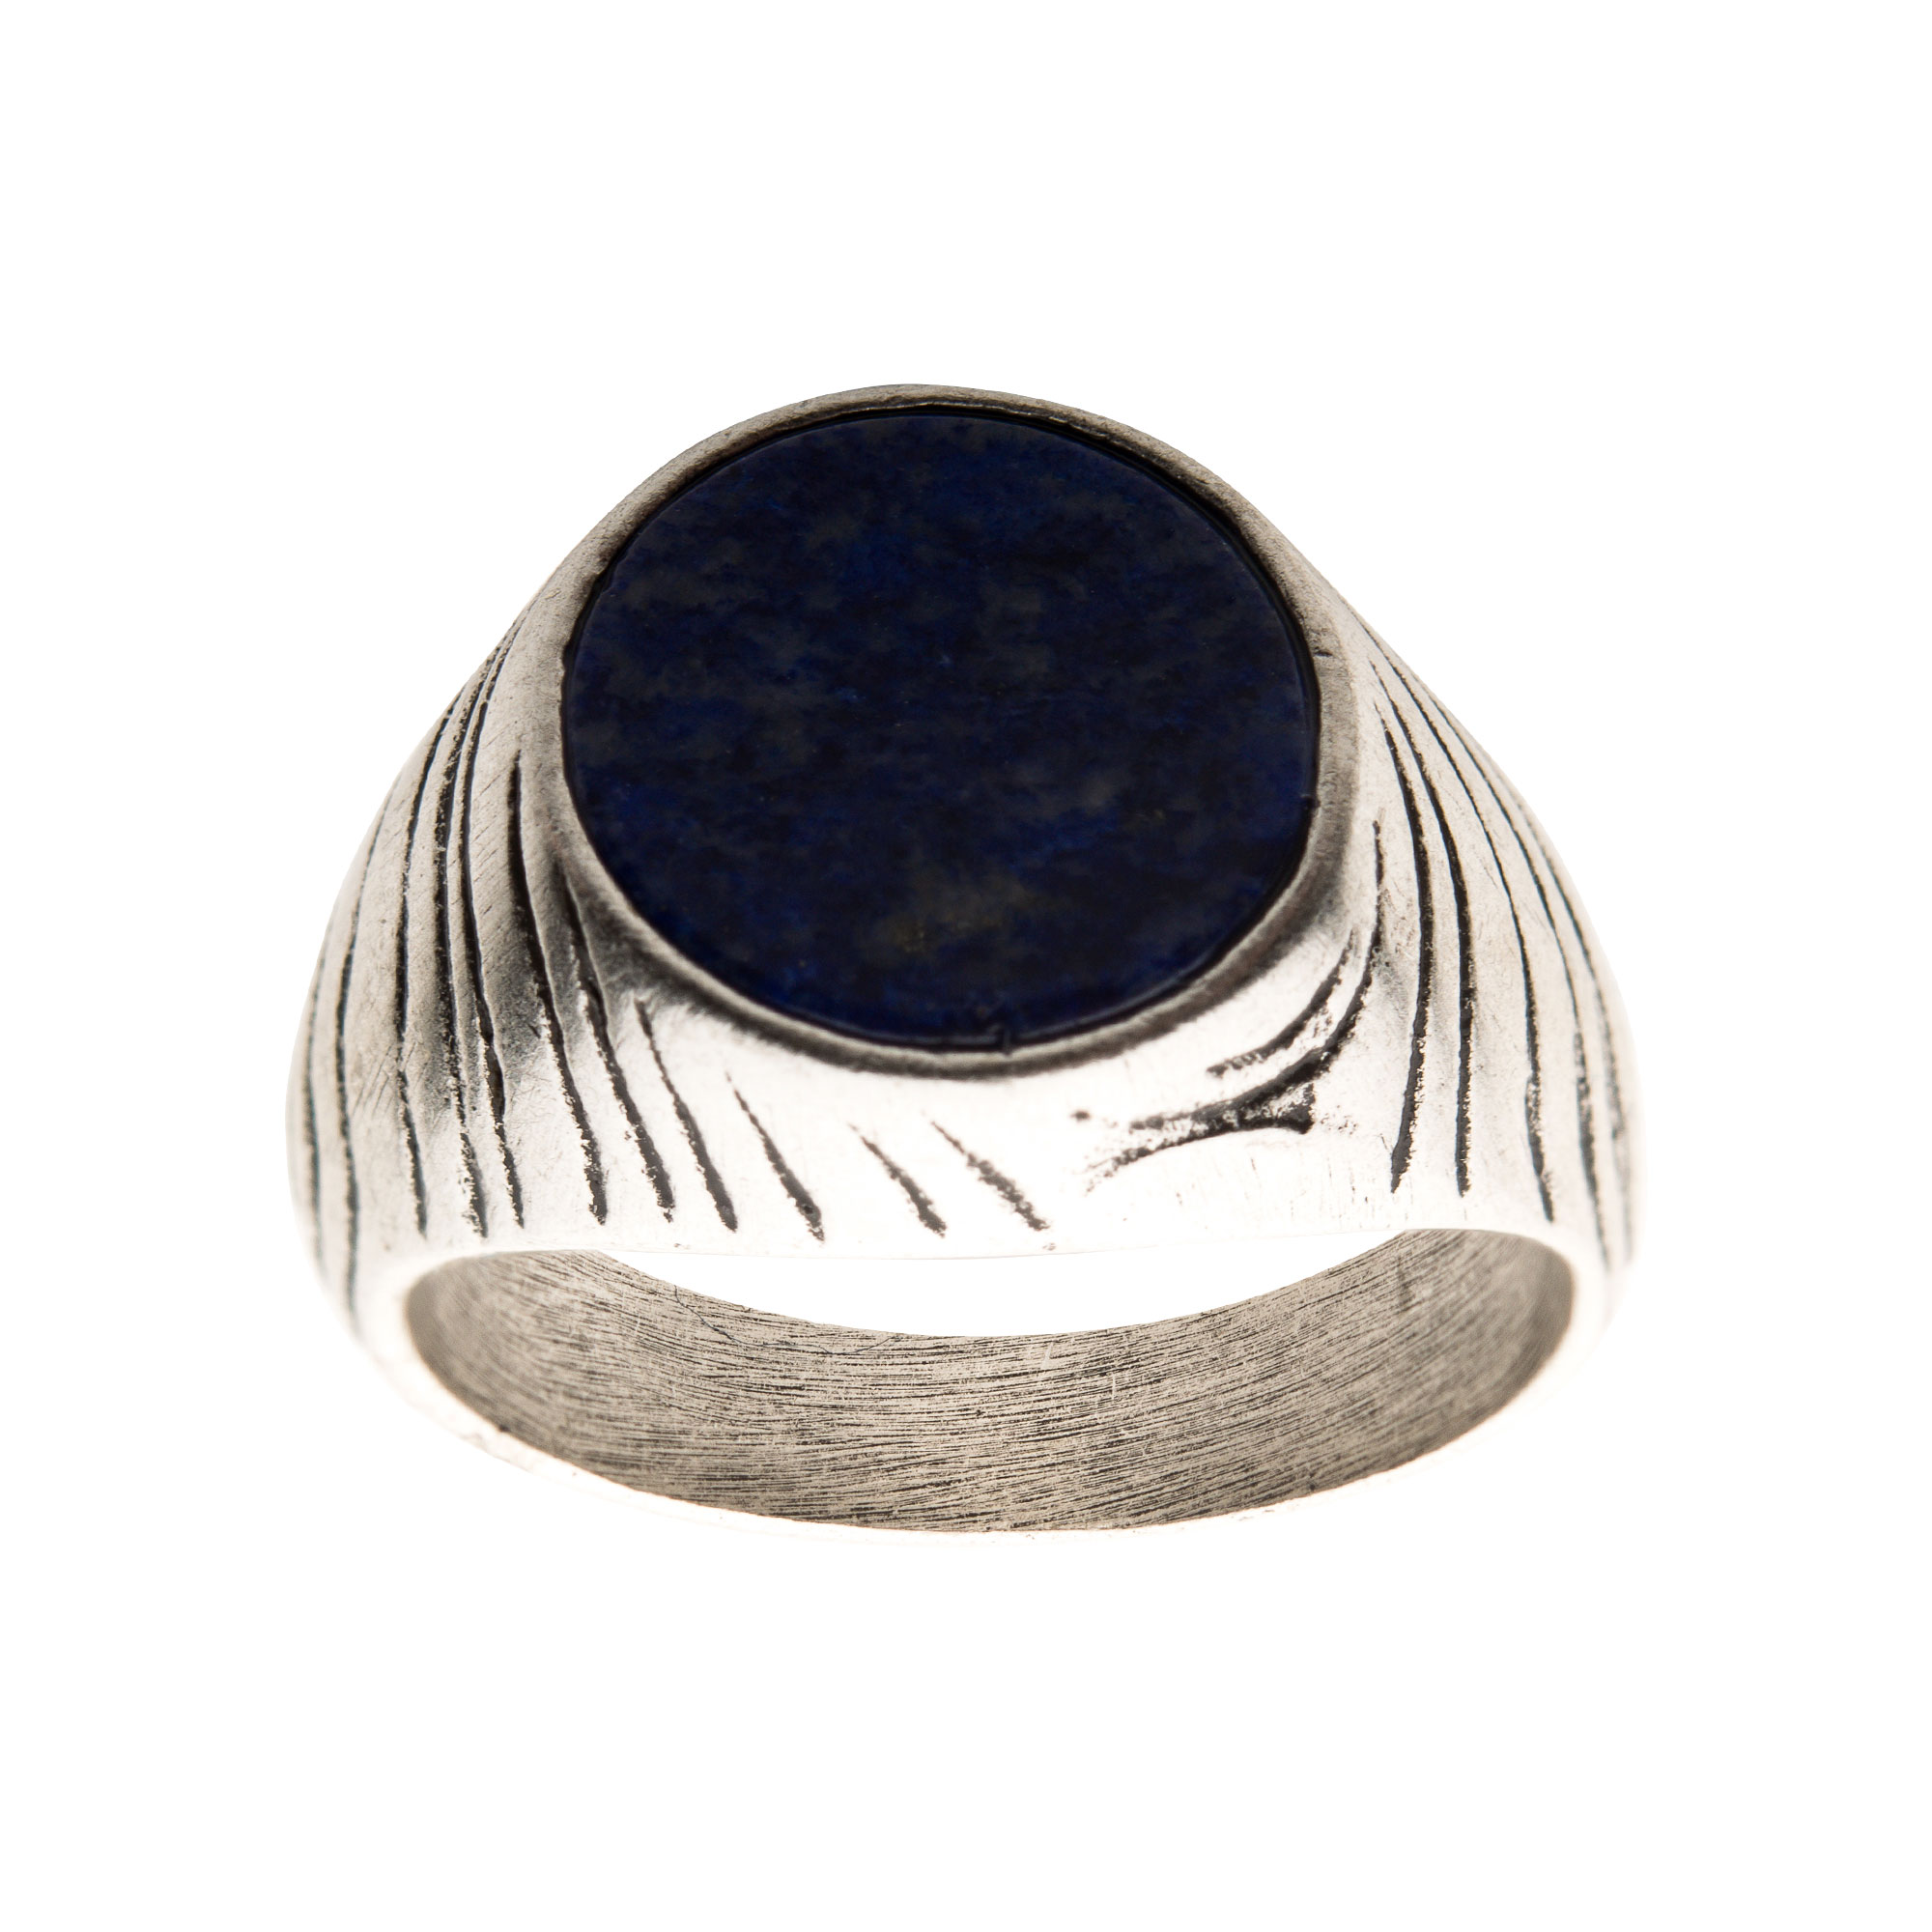 Stainless Steel Silver Plated with Lapis Stone Ring Image 2 Morin Jewelers Southbridge, MA